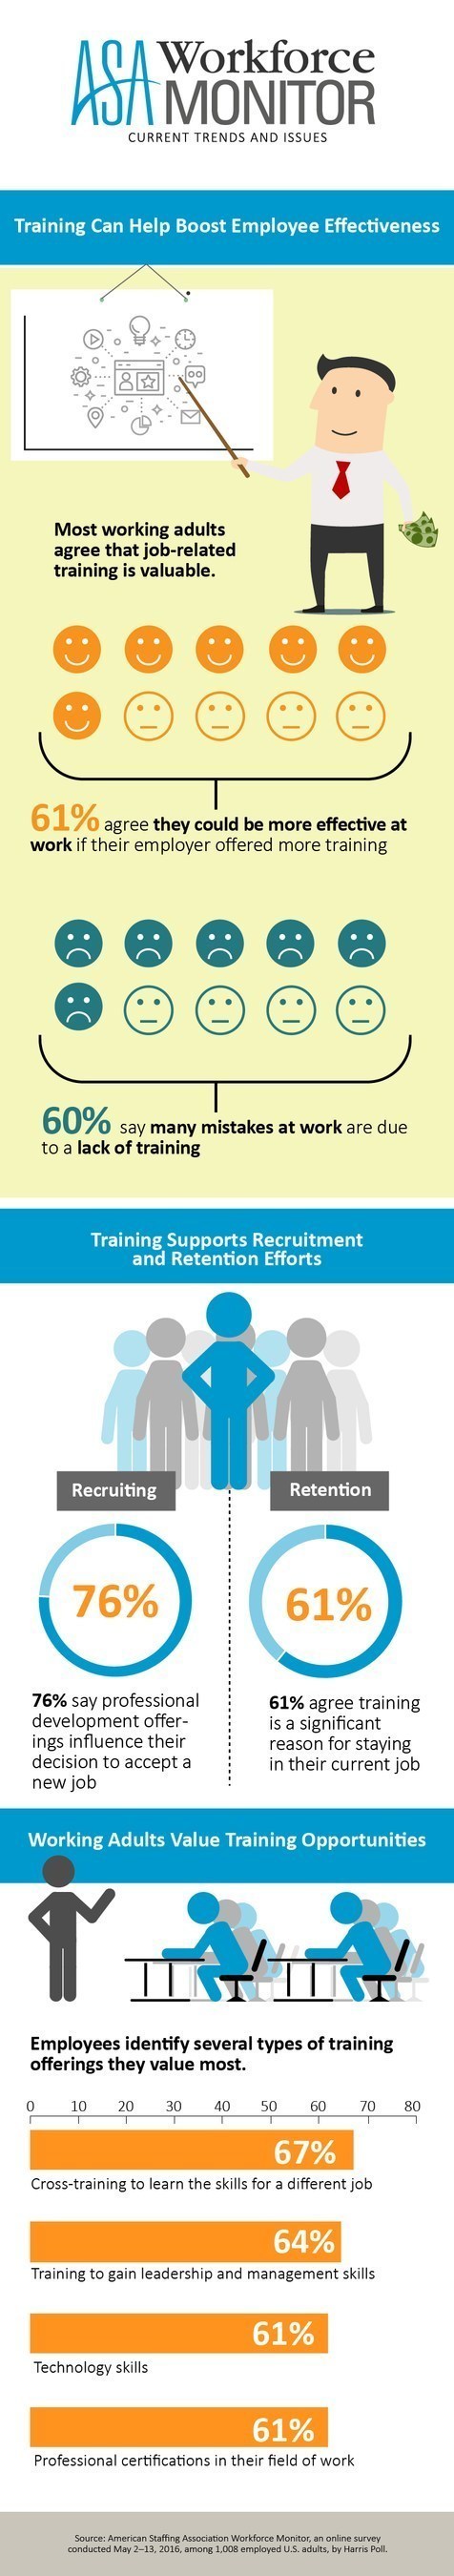 For a majority of working adults, employer-provided training programs can improve their effectiveness and help limit mistakes on the job, according to the ASA Workforce Monitor.